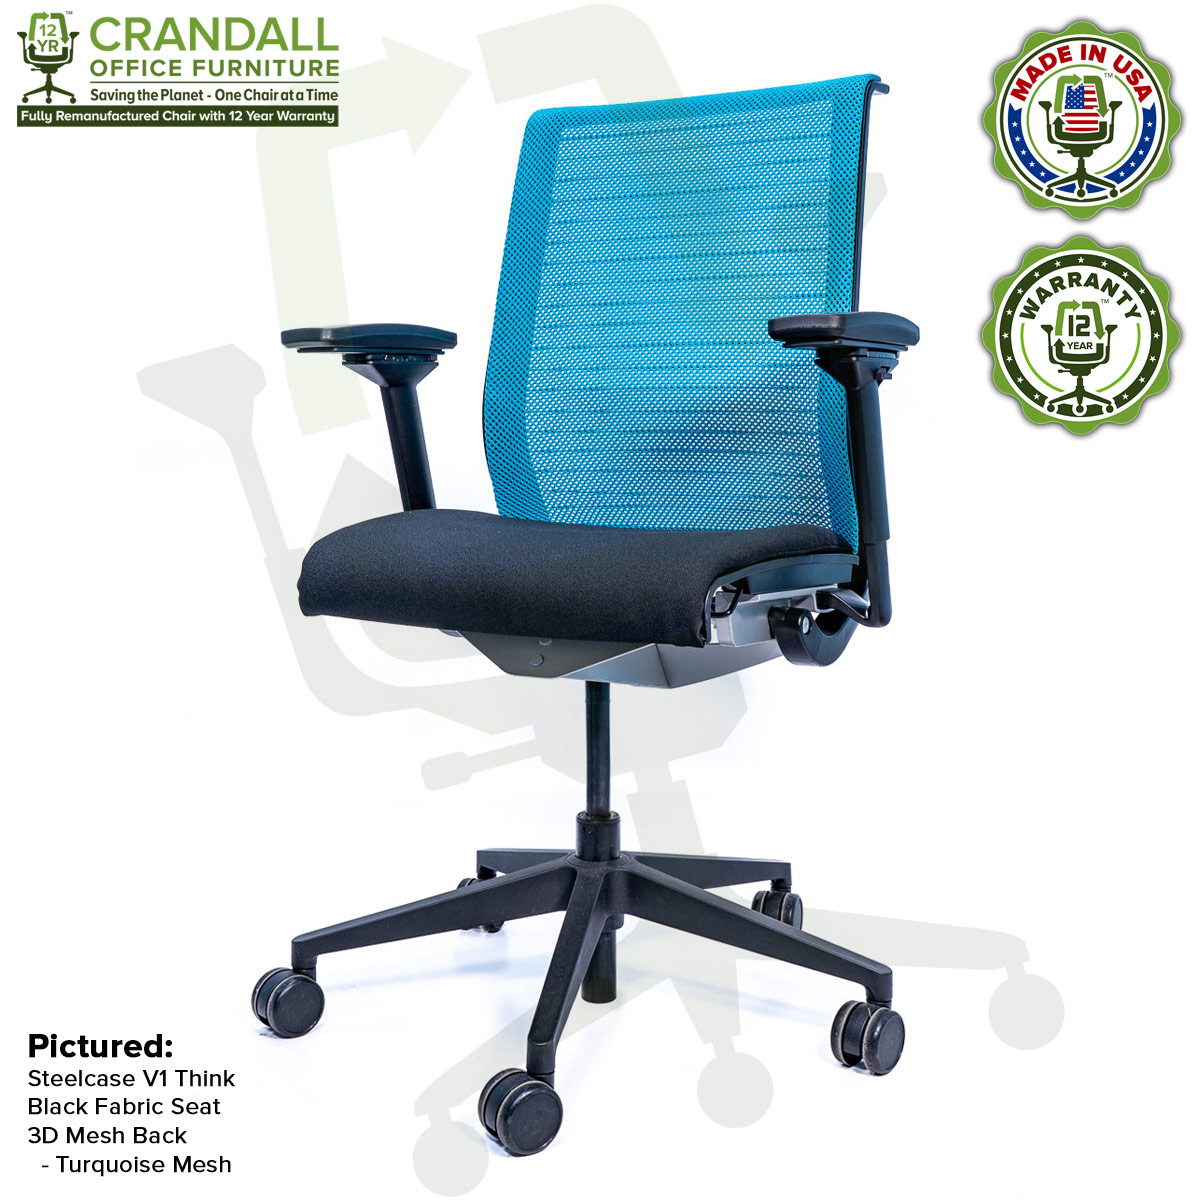 Crandall Office Furniture Remanufactured Steelcase Think Chair with 12 Year Warranty - Mesh - Turquoise